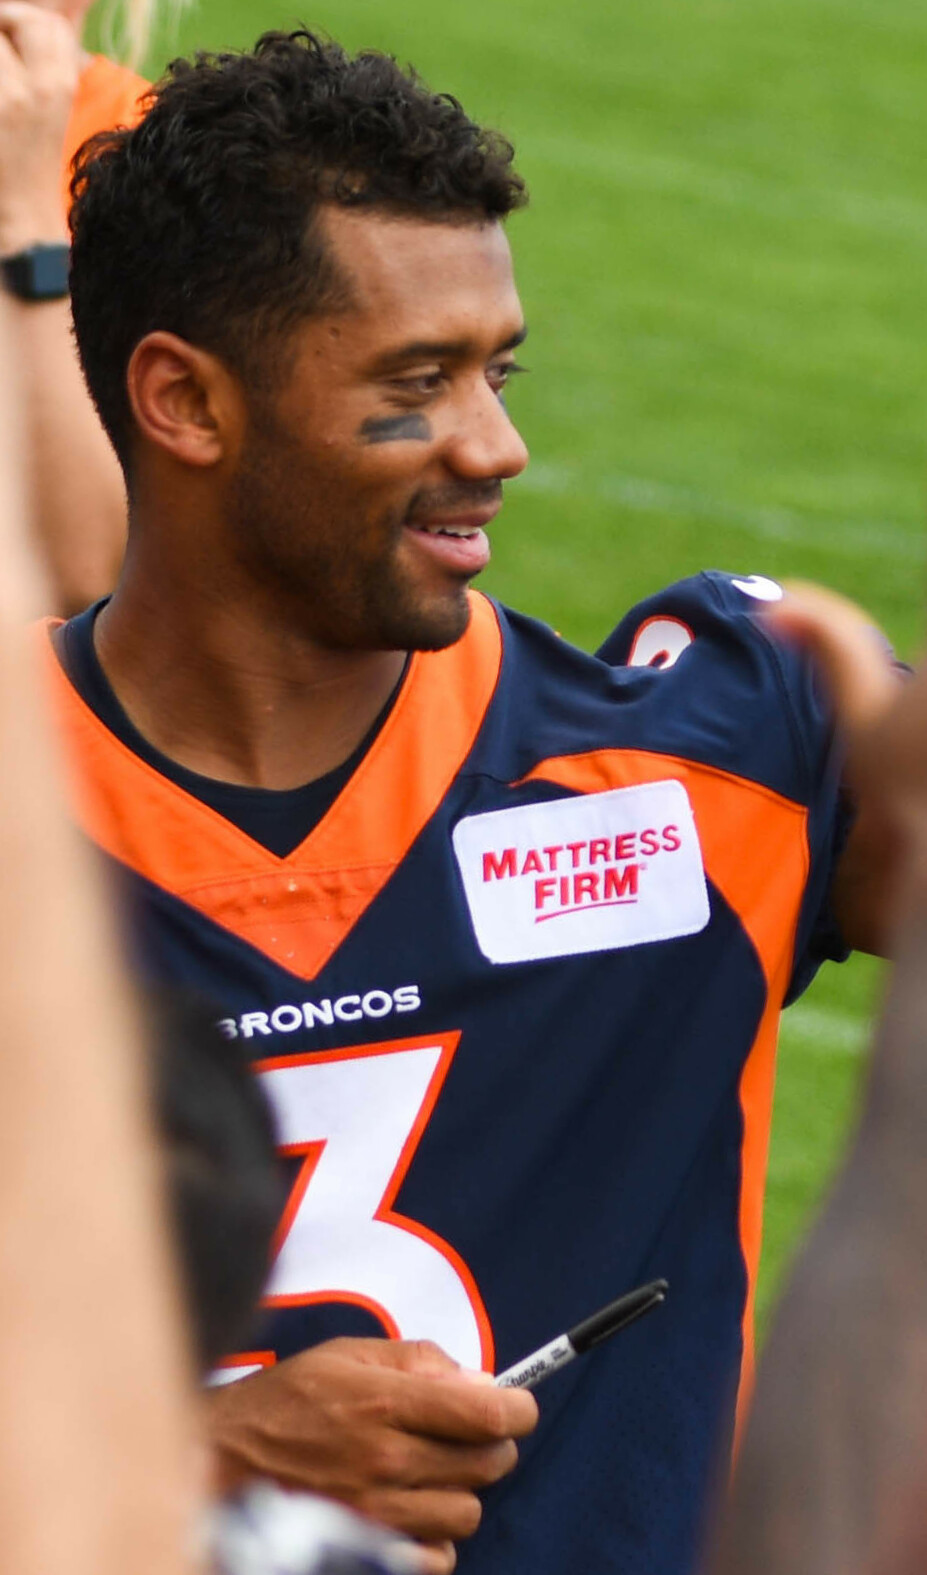 russell wilson in a broncos uniform